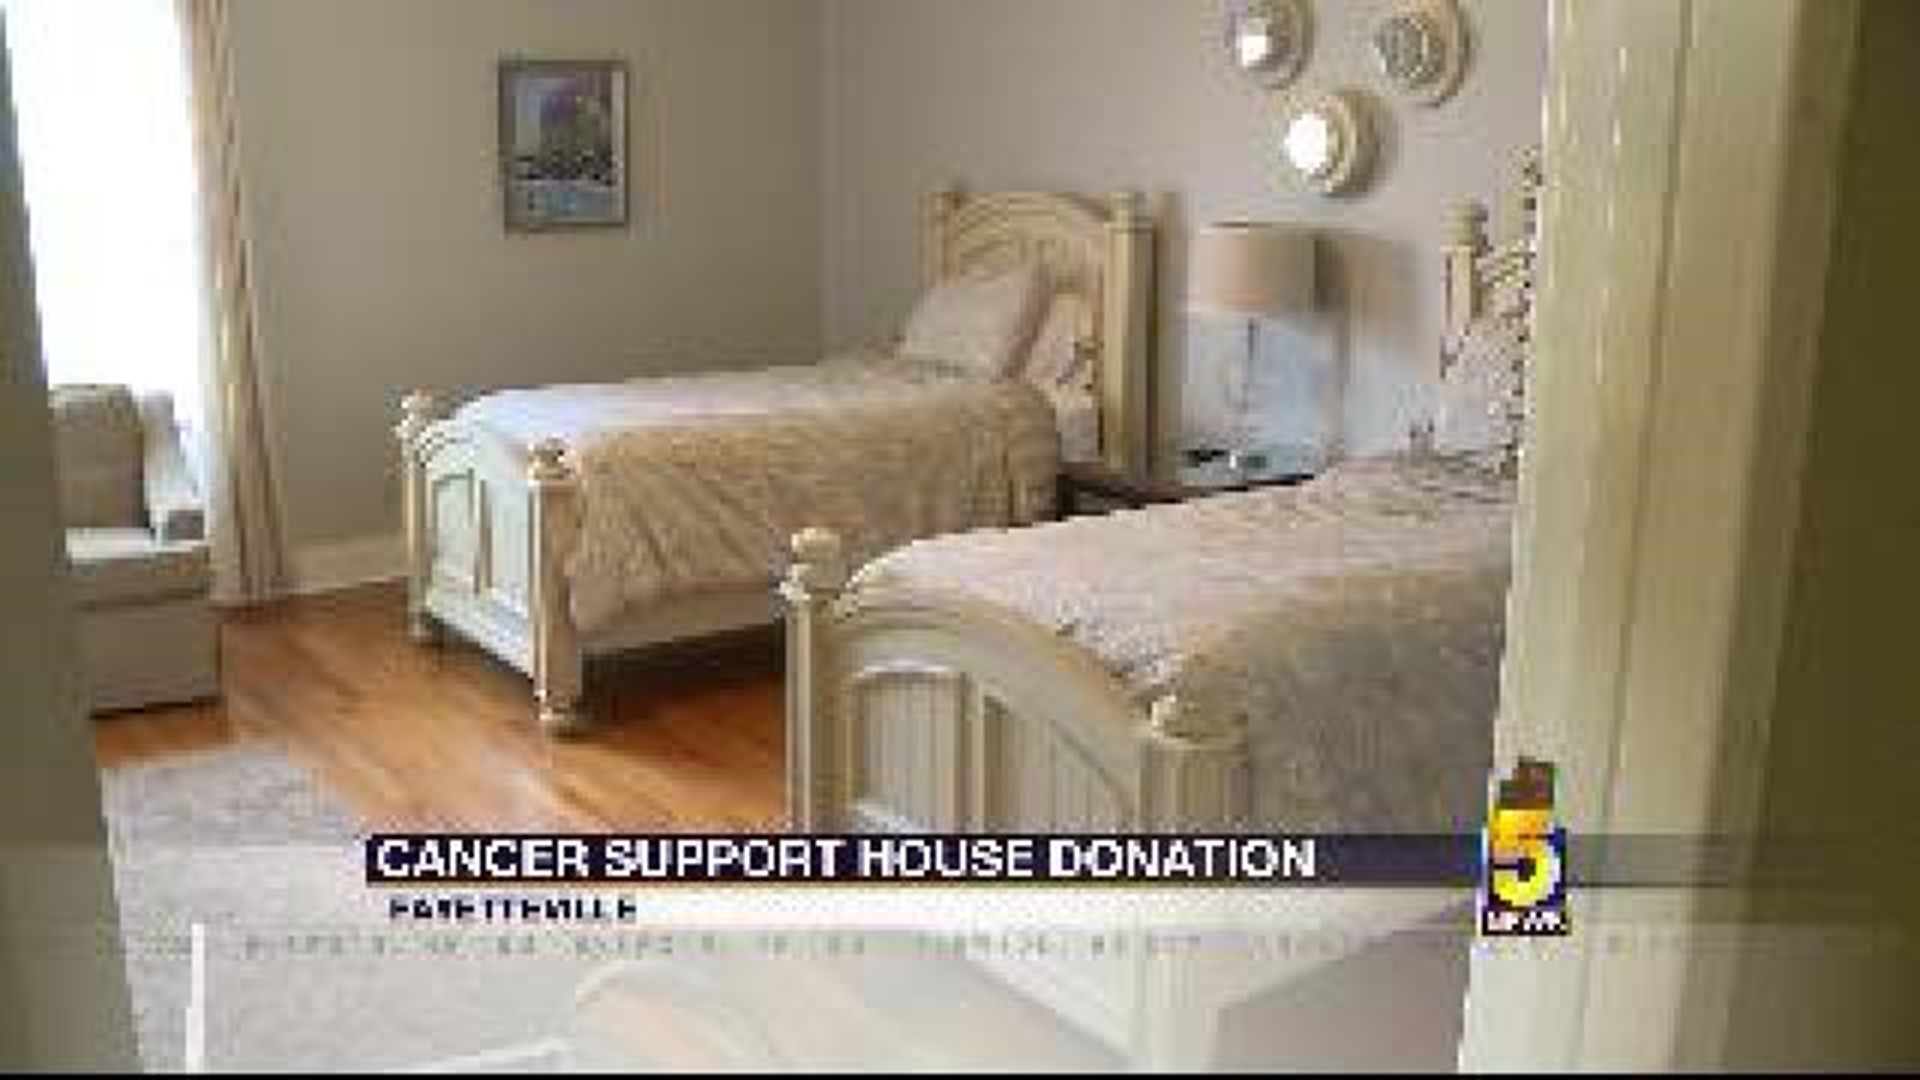 Washington Regional Cancer Support Home Receives Grant